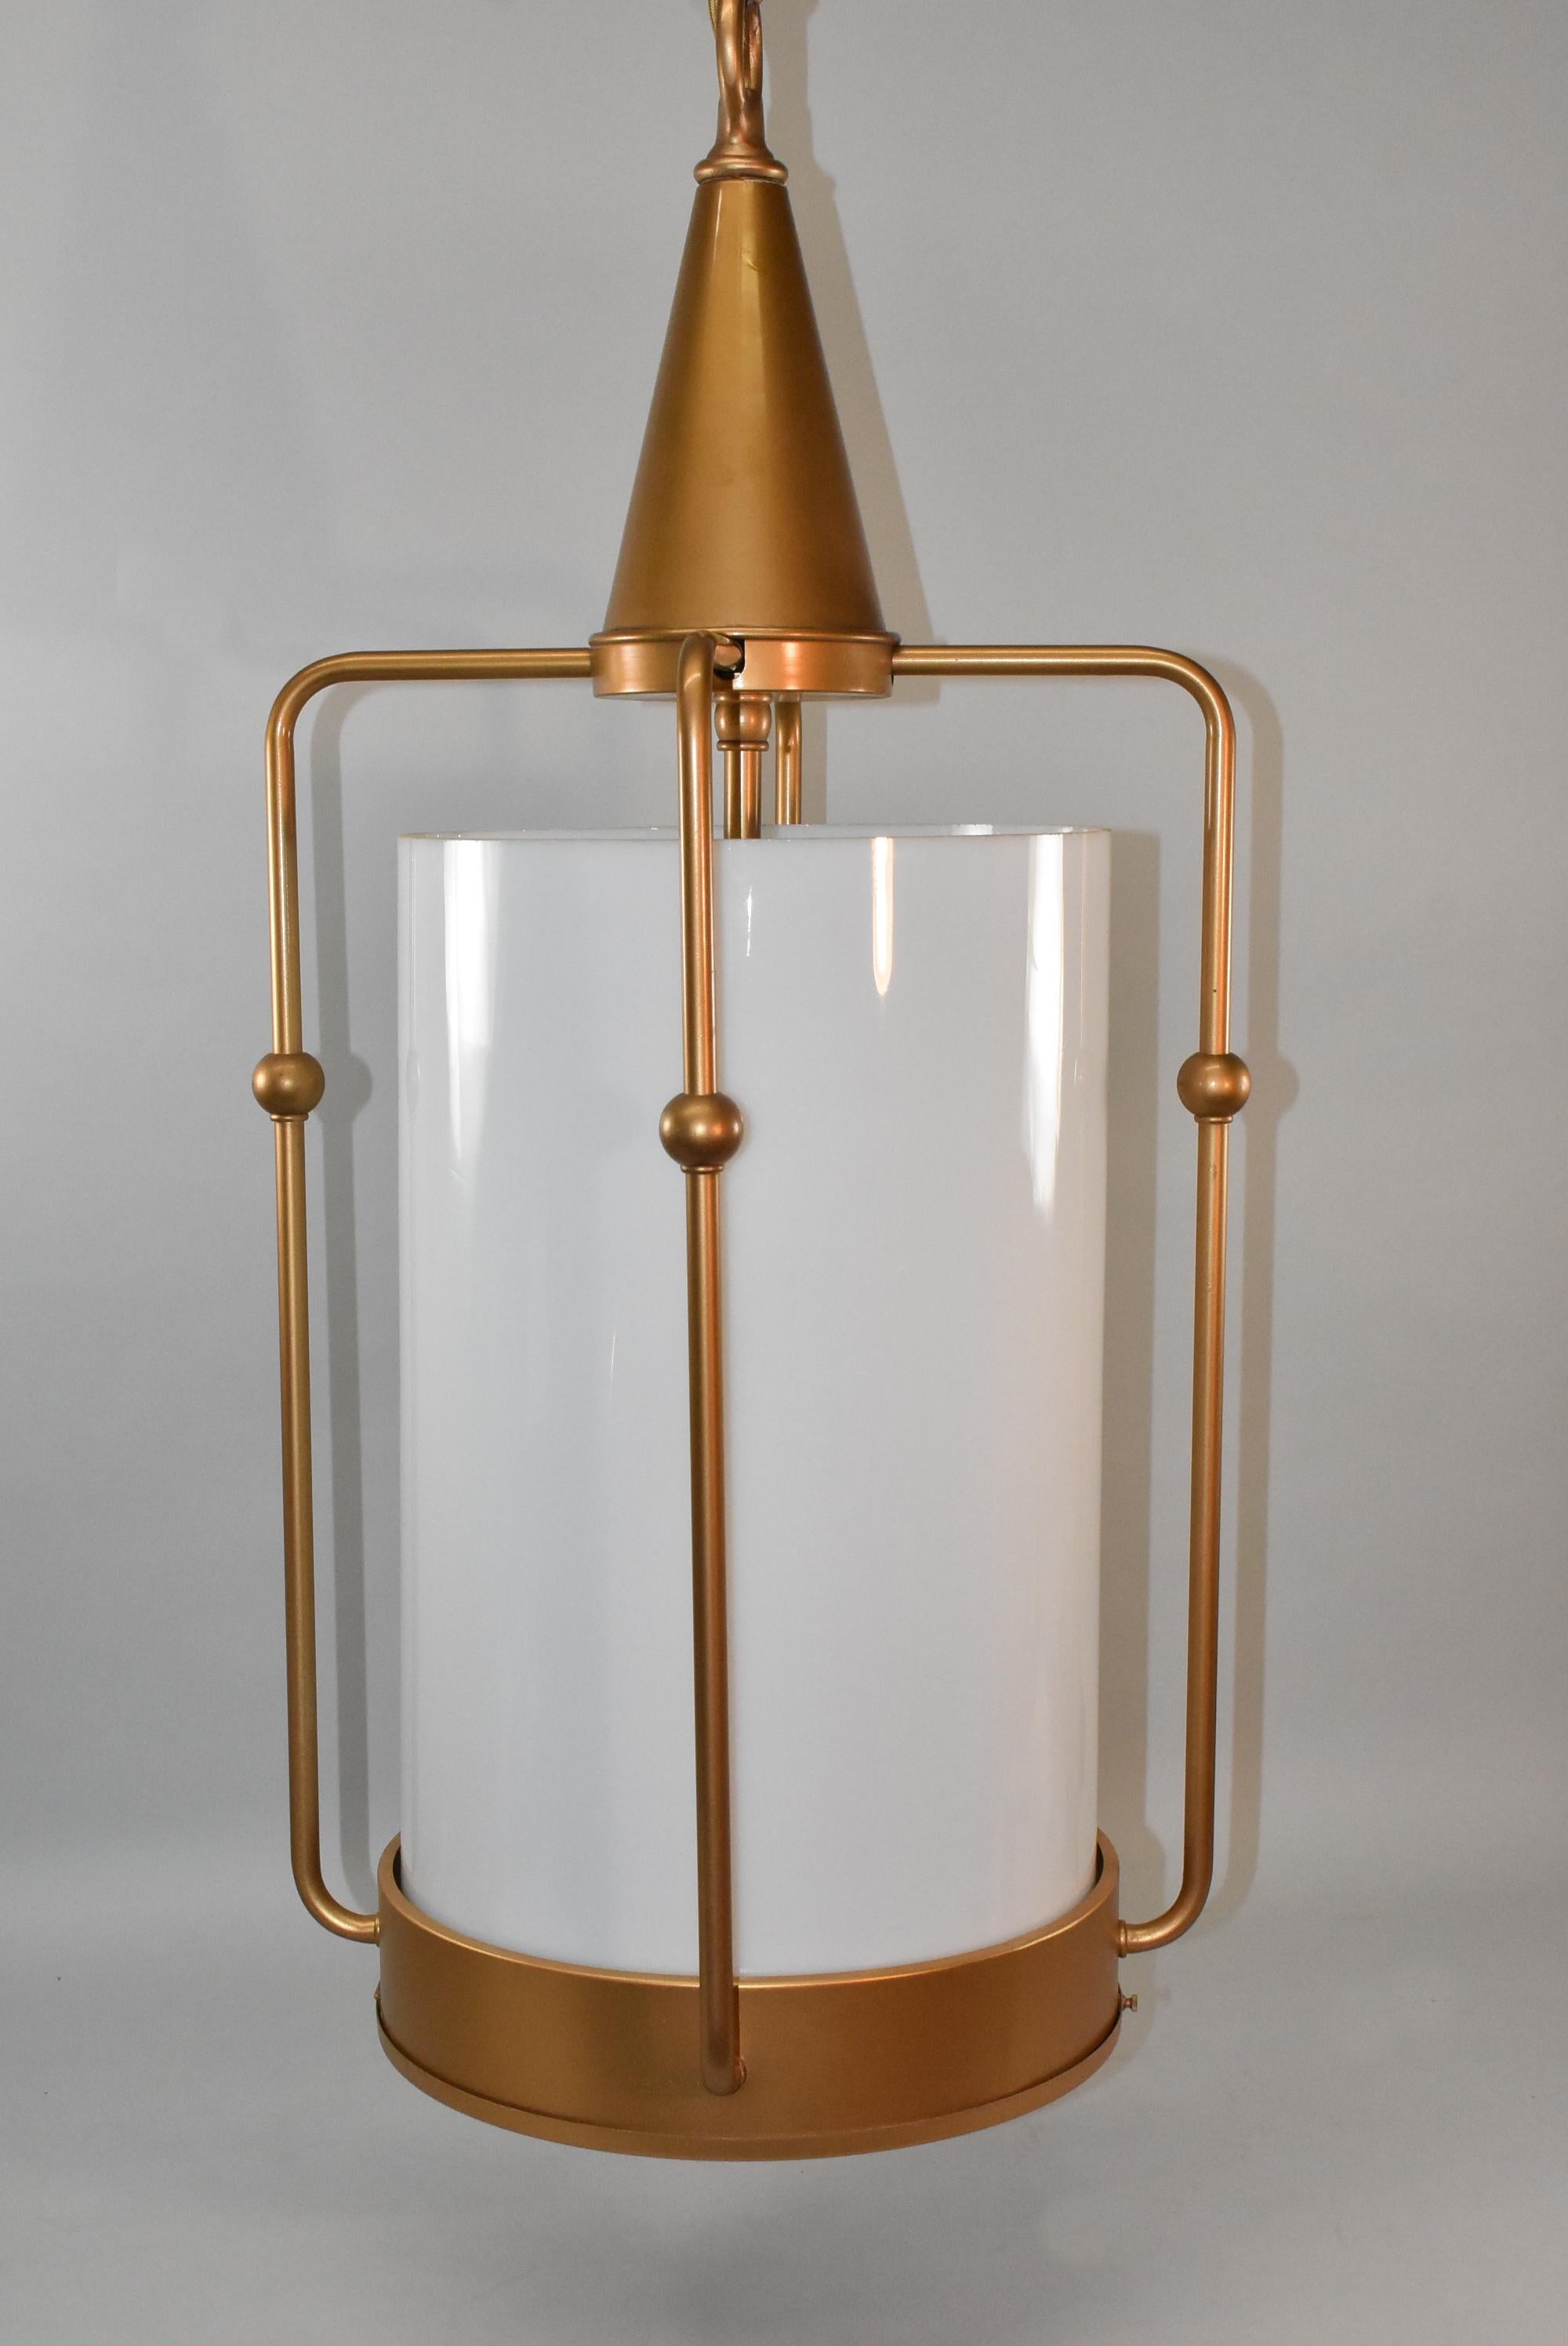 Industrial vintage gold and opaque white glass cylinder column chandelier /pendant. Gold cage shape open frame with cone shape top and gold decorative details. Four interior sockets. Three fixtures are available. Price reflects one.